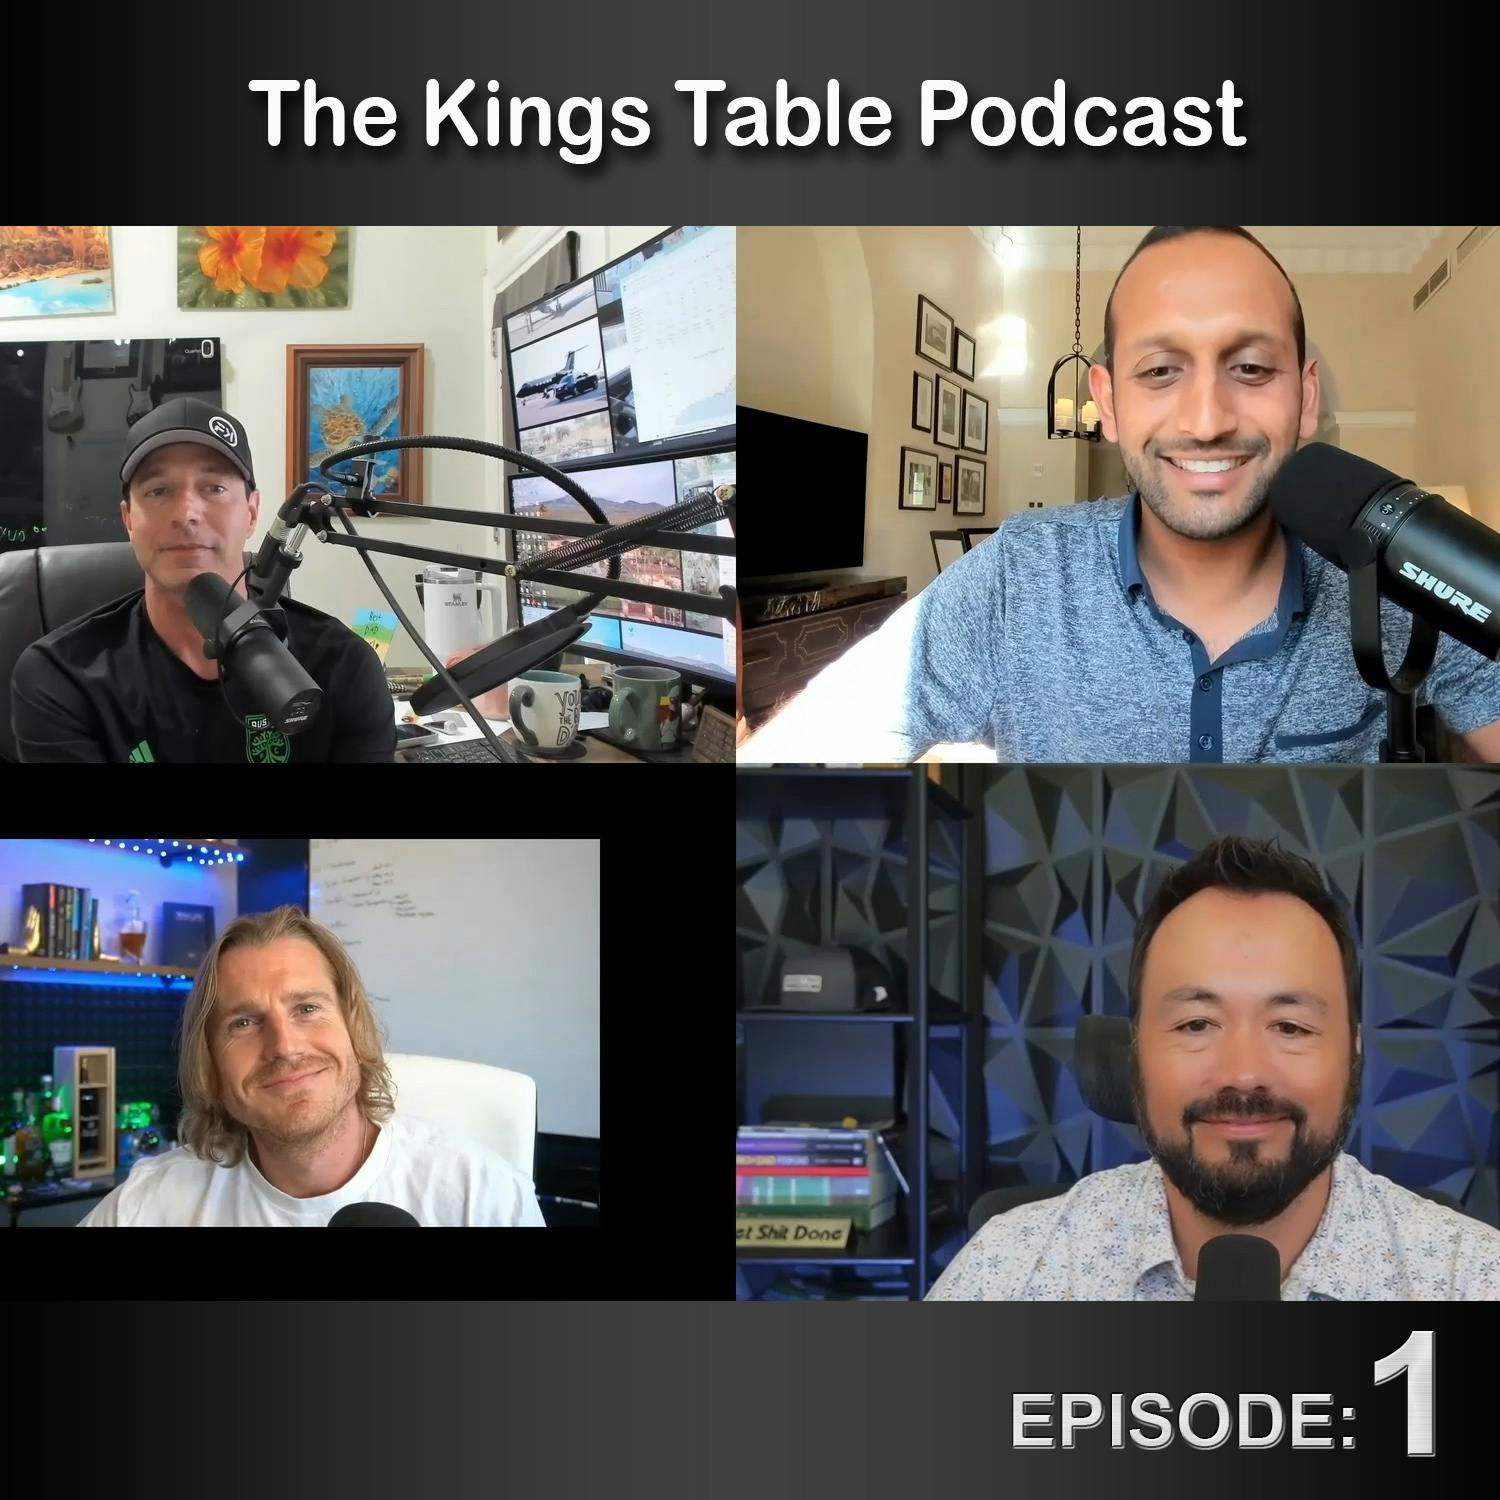 The Kings Table Podcast - Pilot Episode